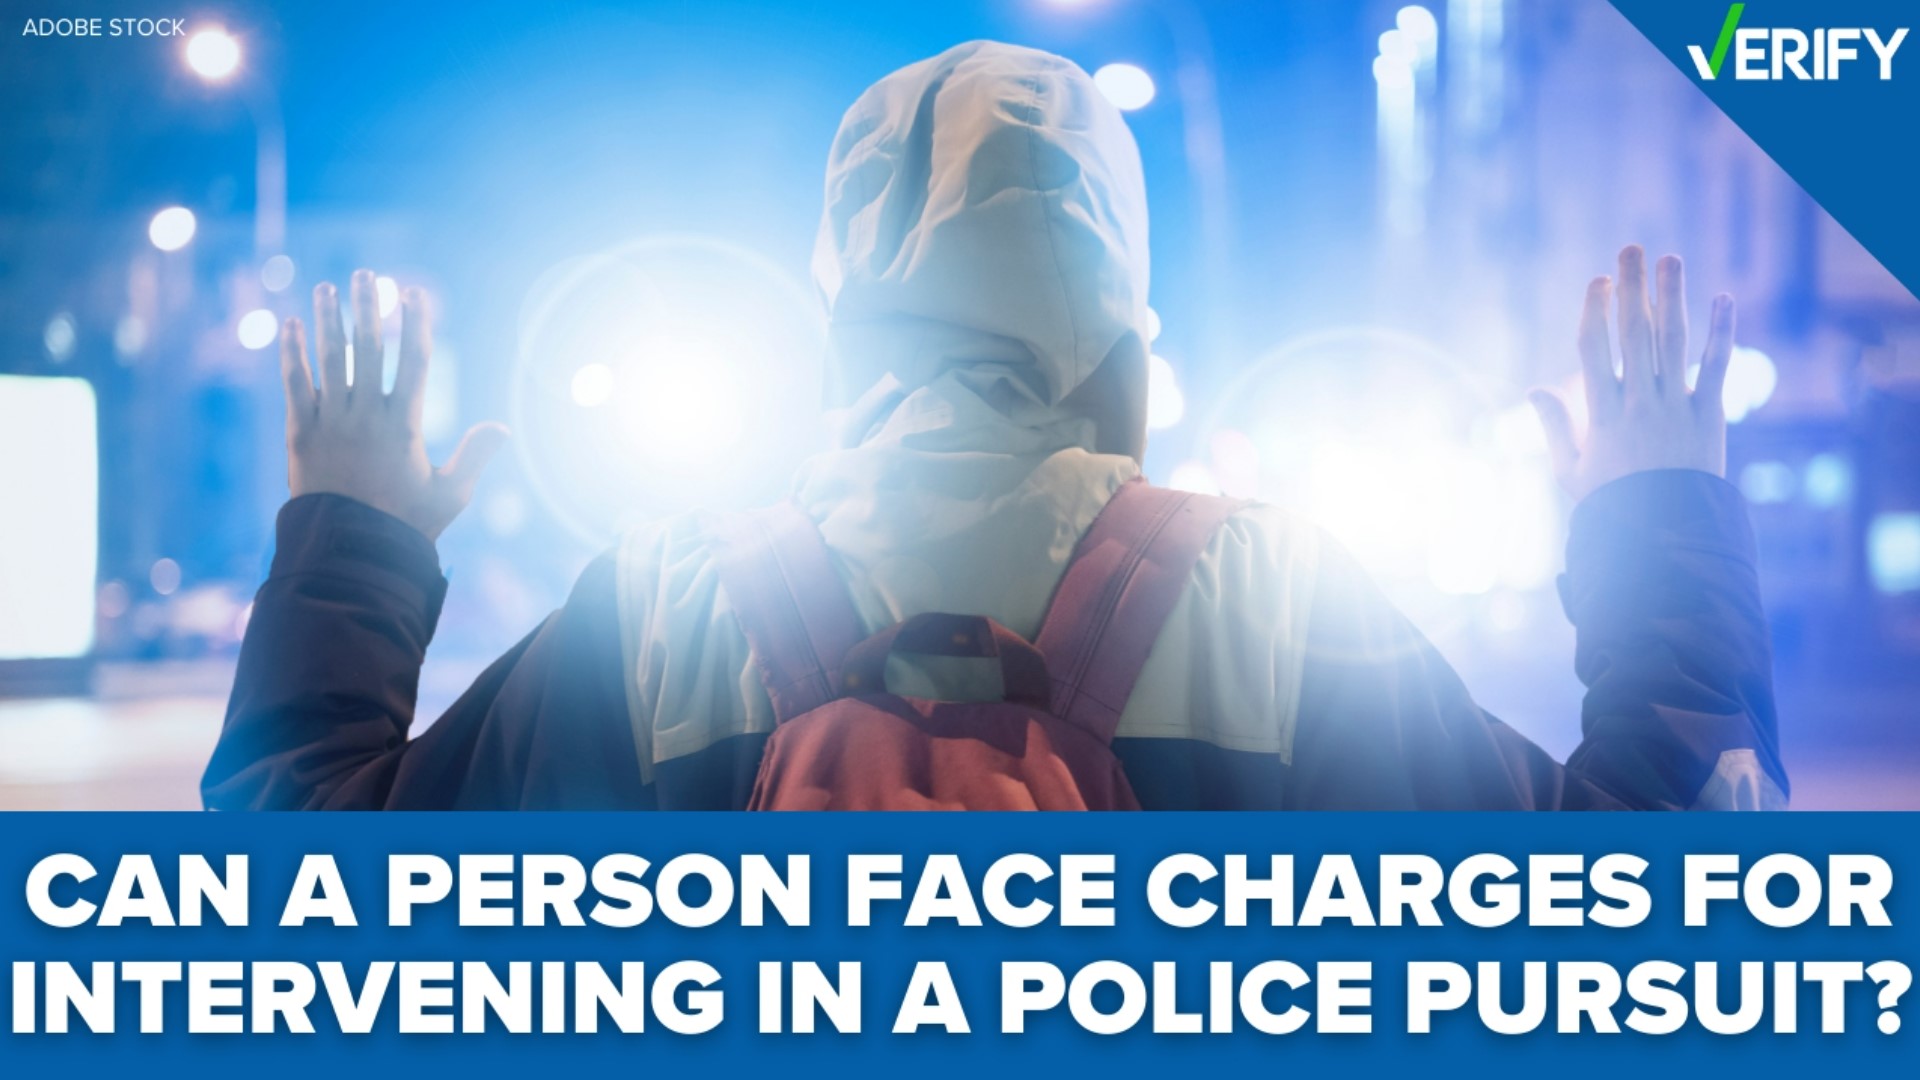 Yes, you can face charges for intervening.